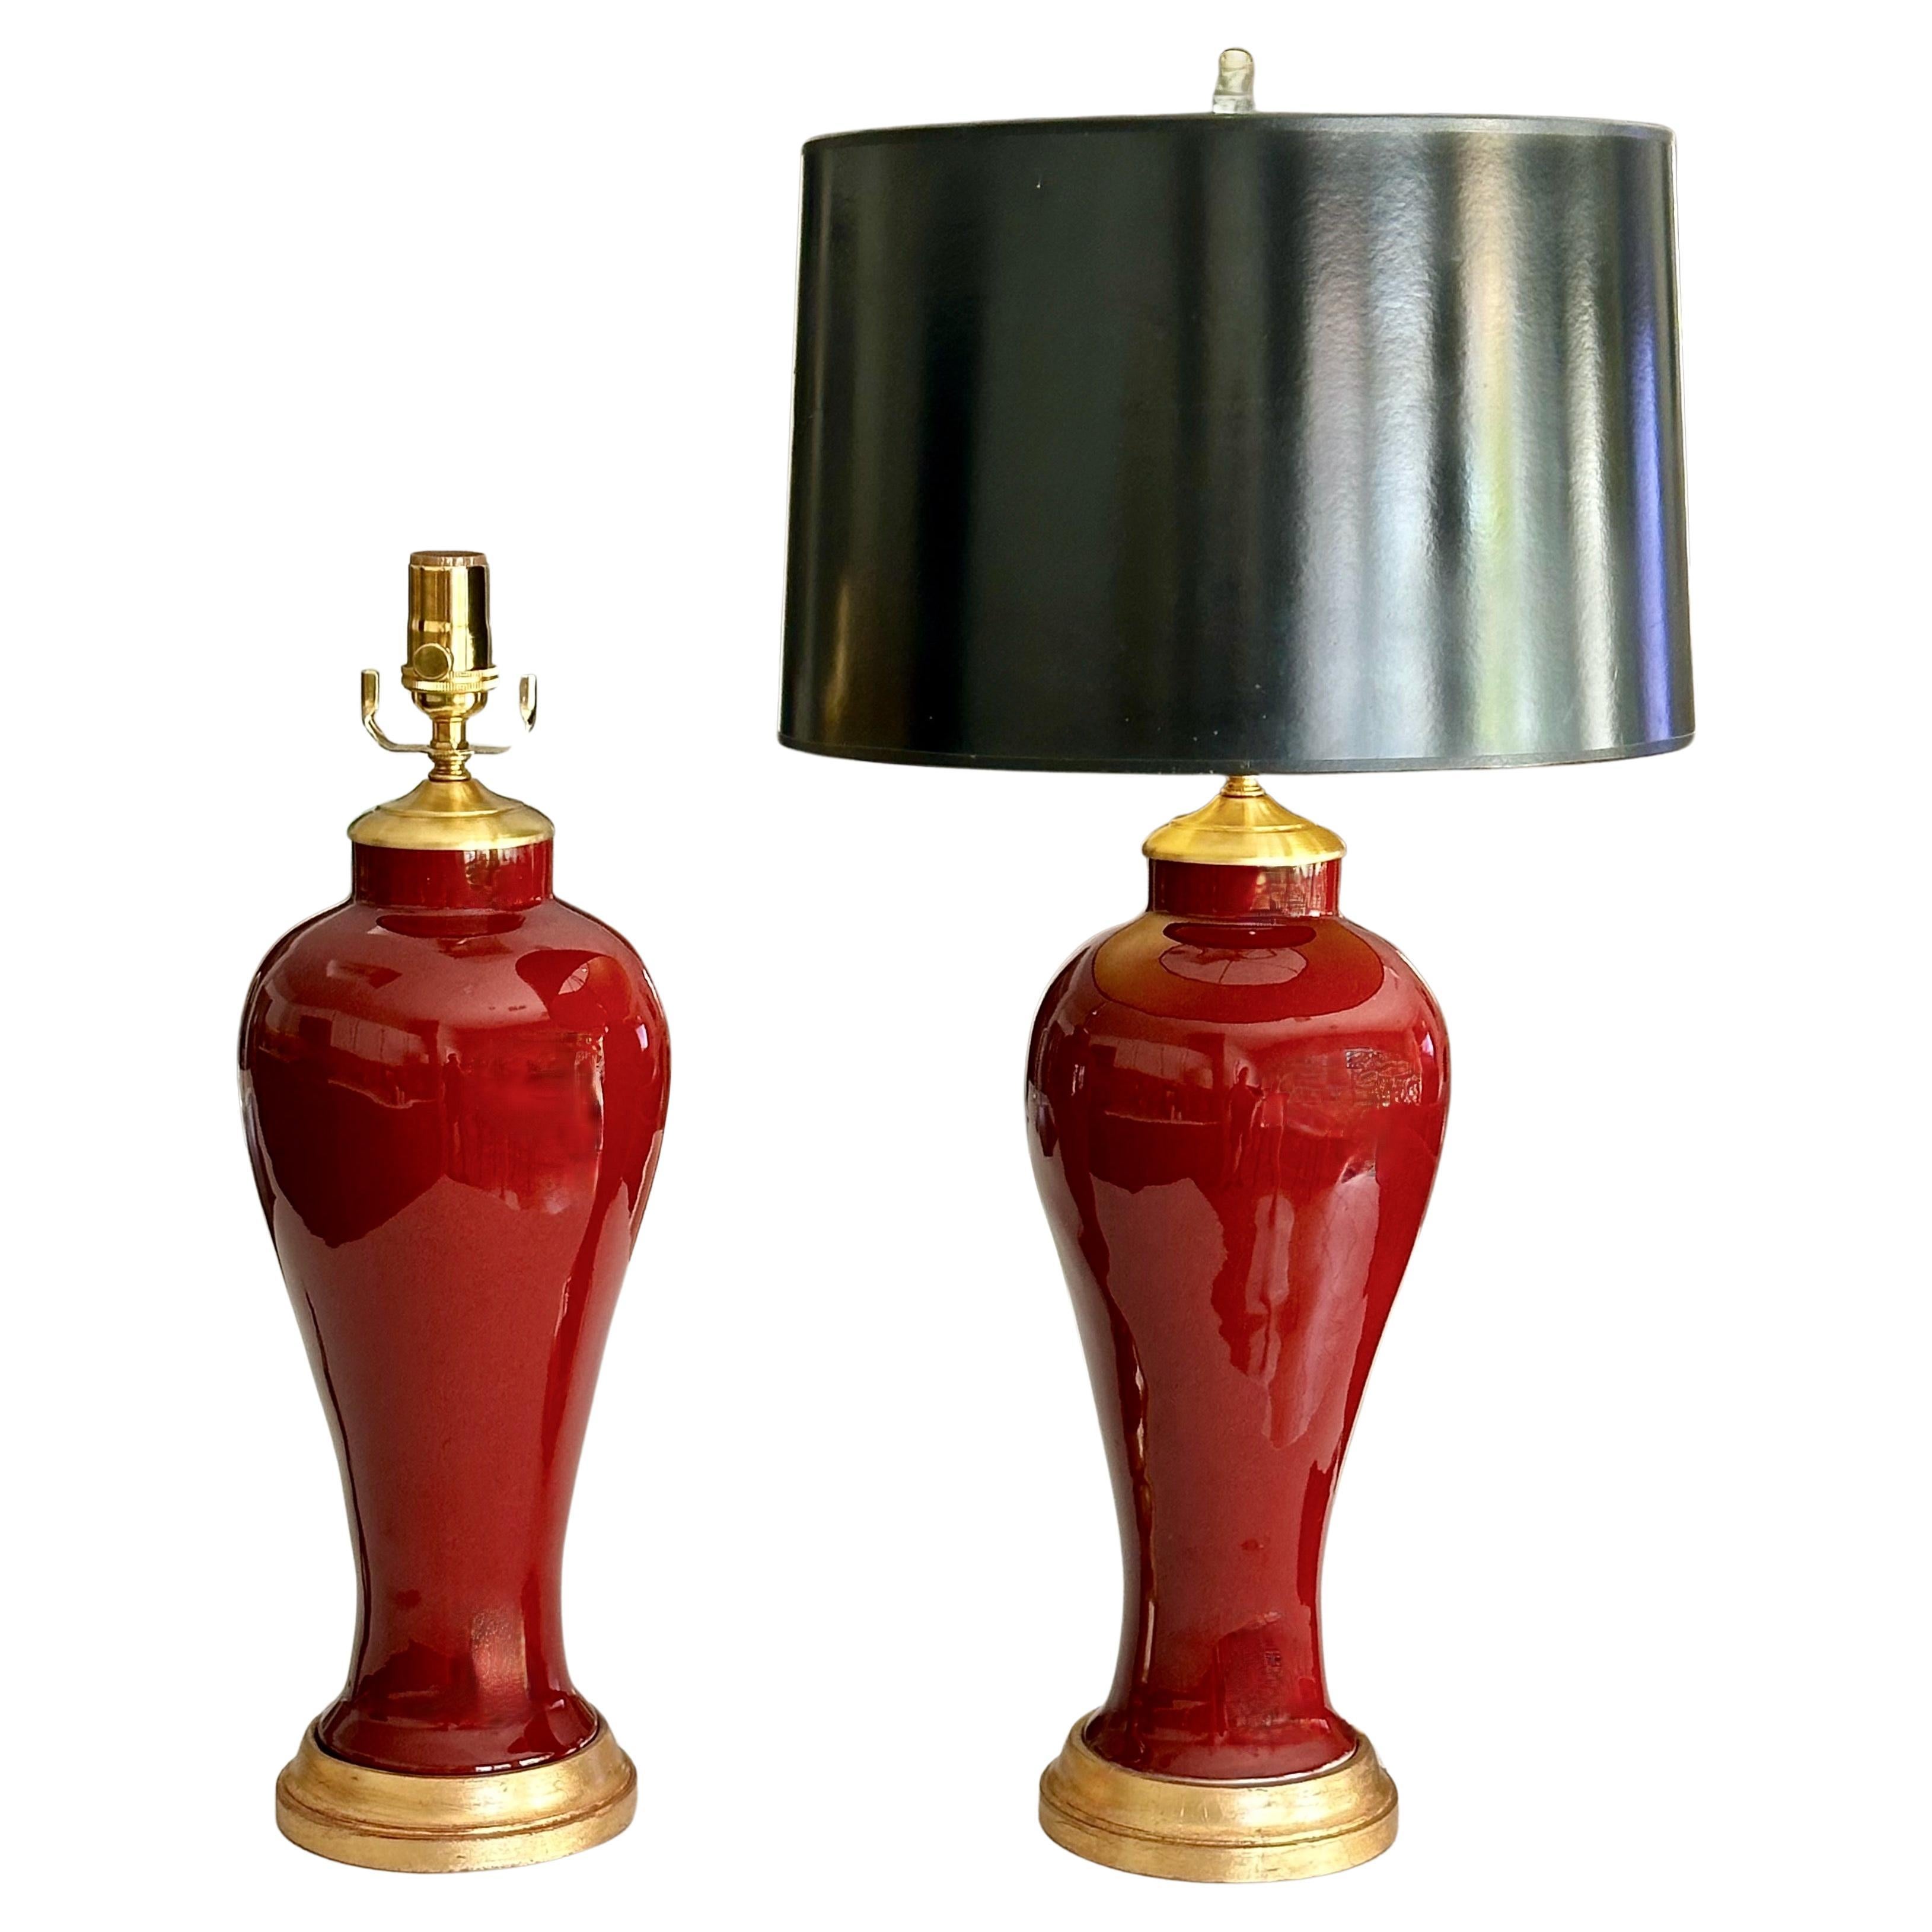 Pair Chinese oxblood porcelain vases mounted on gilt turned wood lamp bases. Complimented with brass fittings. Rewired with new 3 way sockets and brown cords . Overall height top of socket 20.5